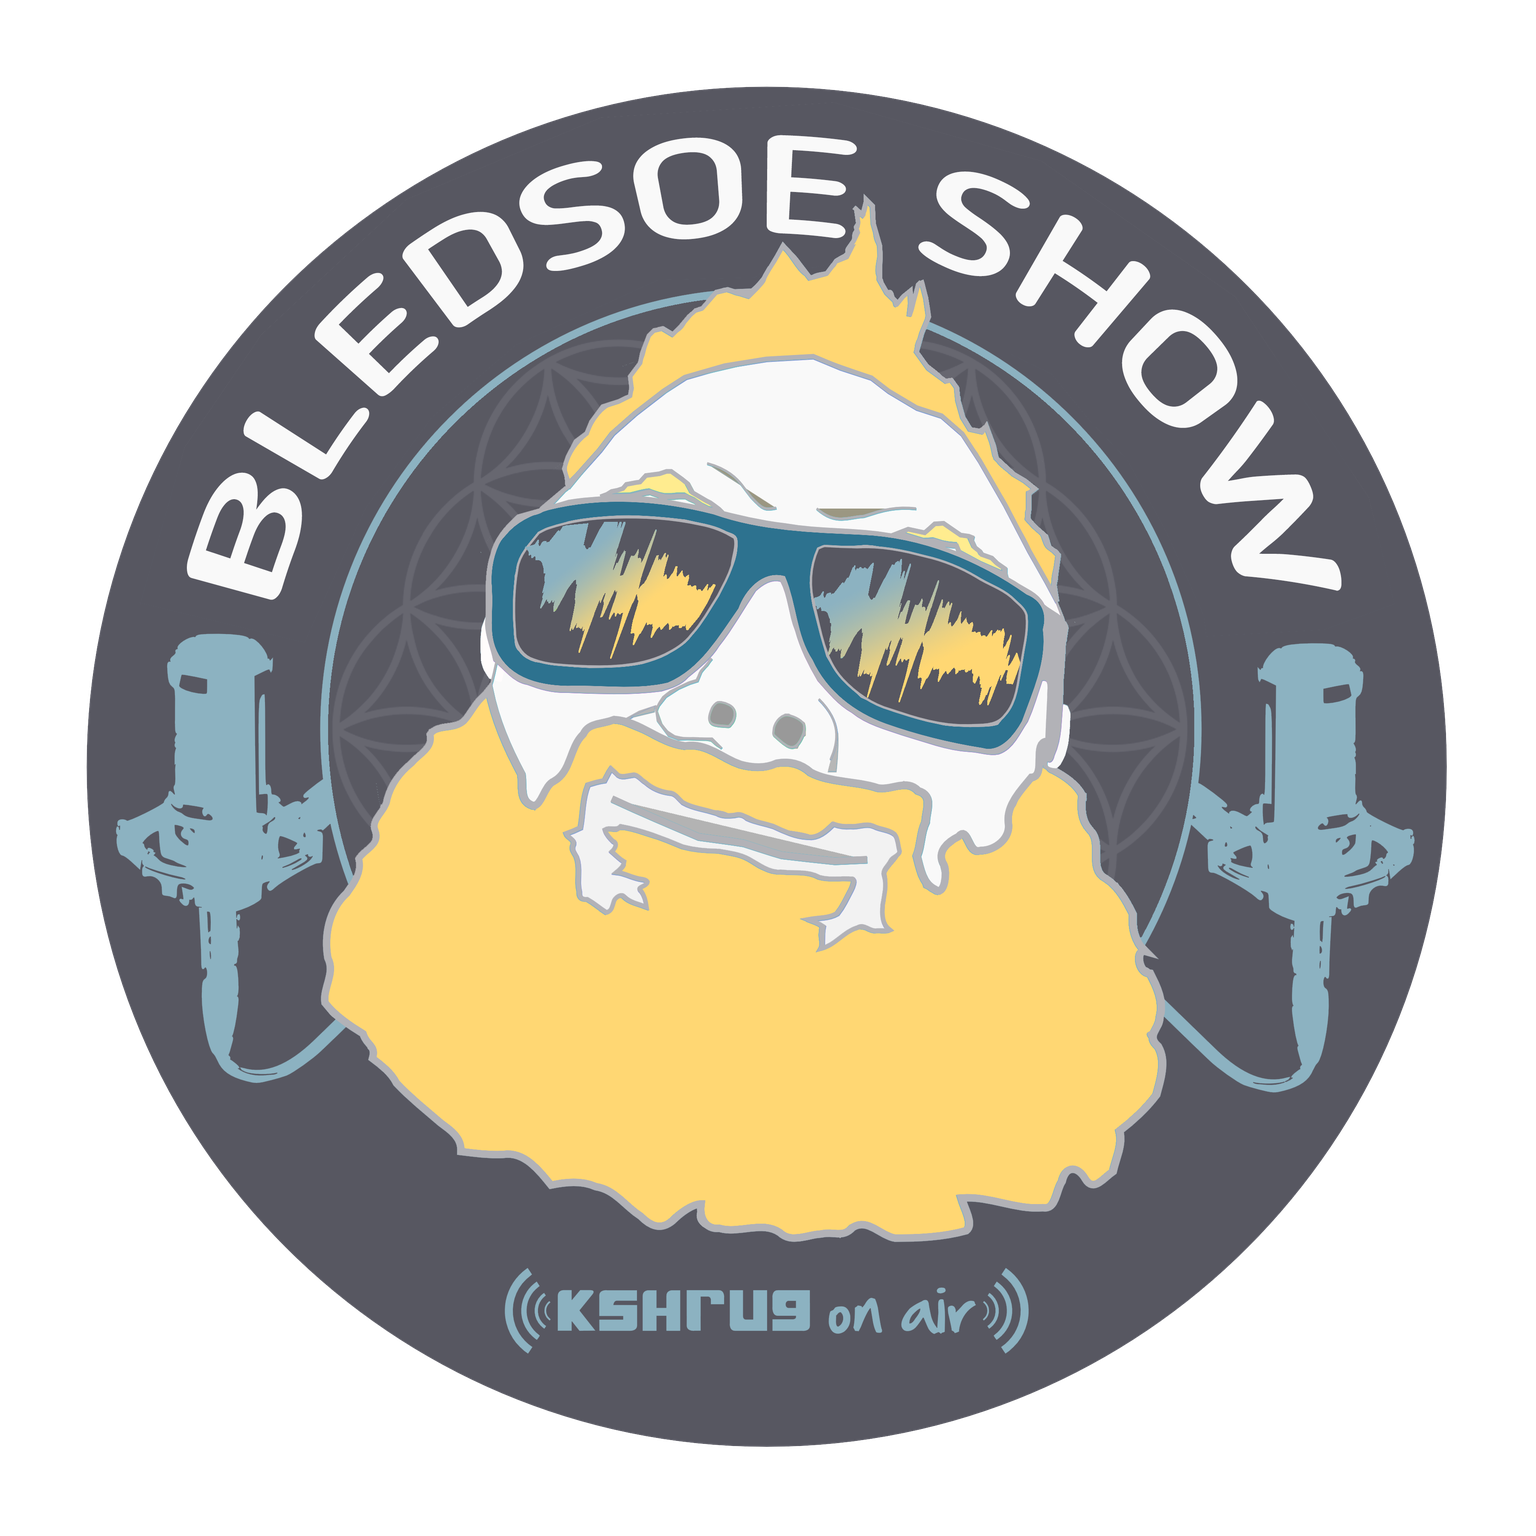 You are currently viewing The Bledsow Show